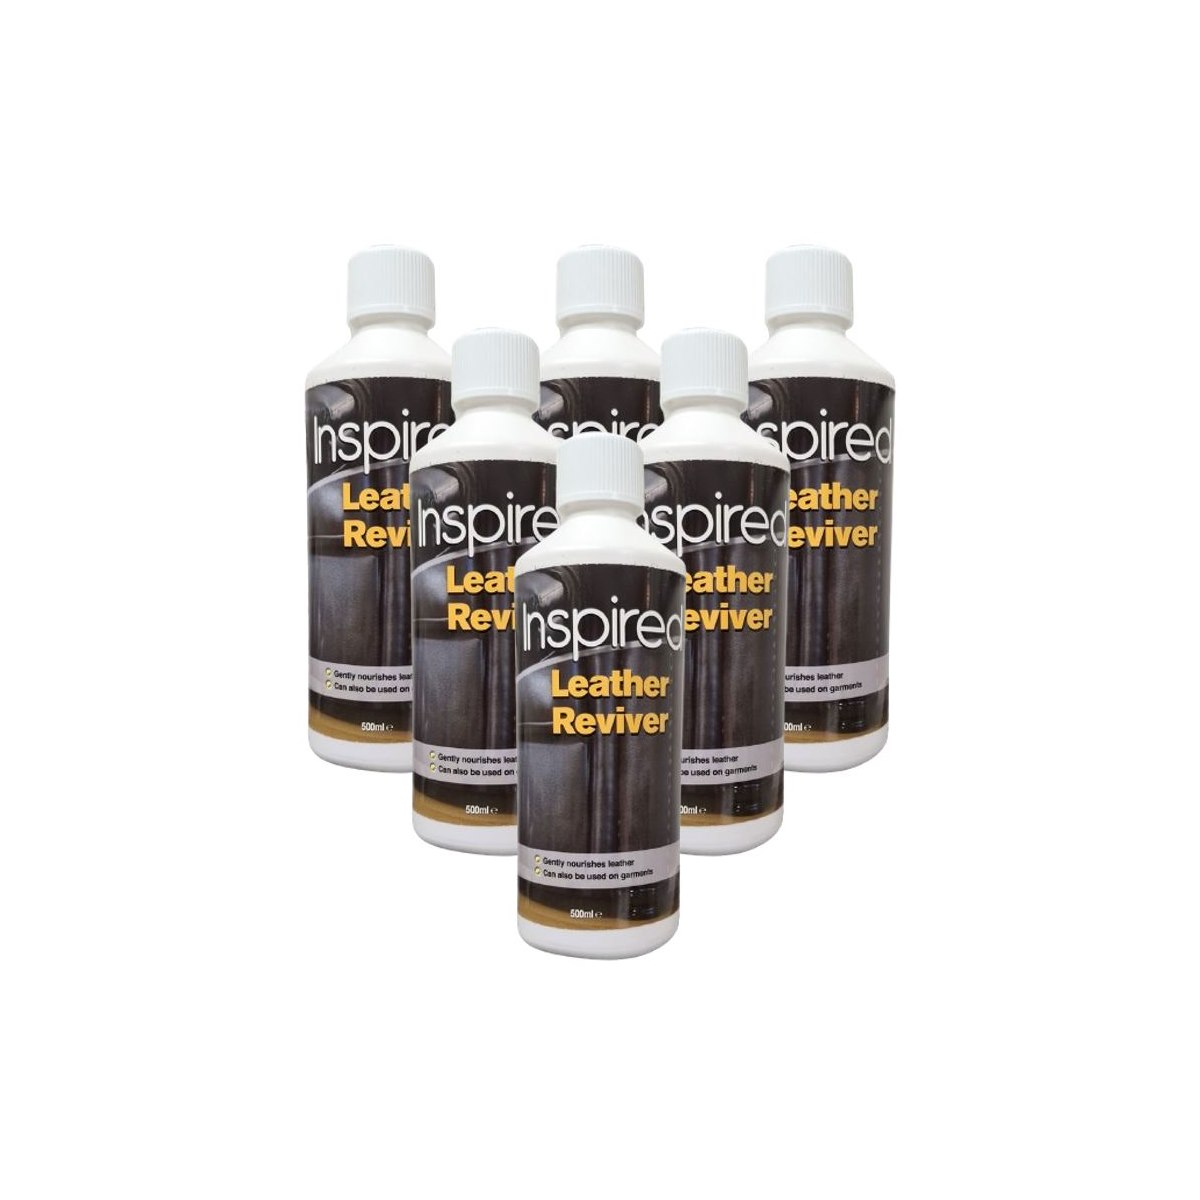 Case of 6 x Inspired Leather Reviver 500ml